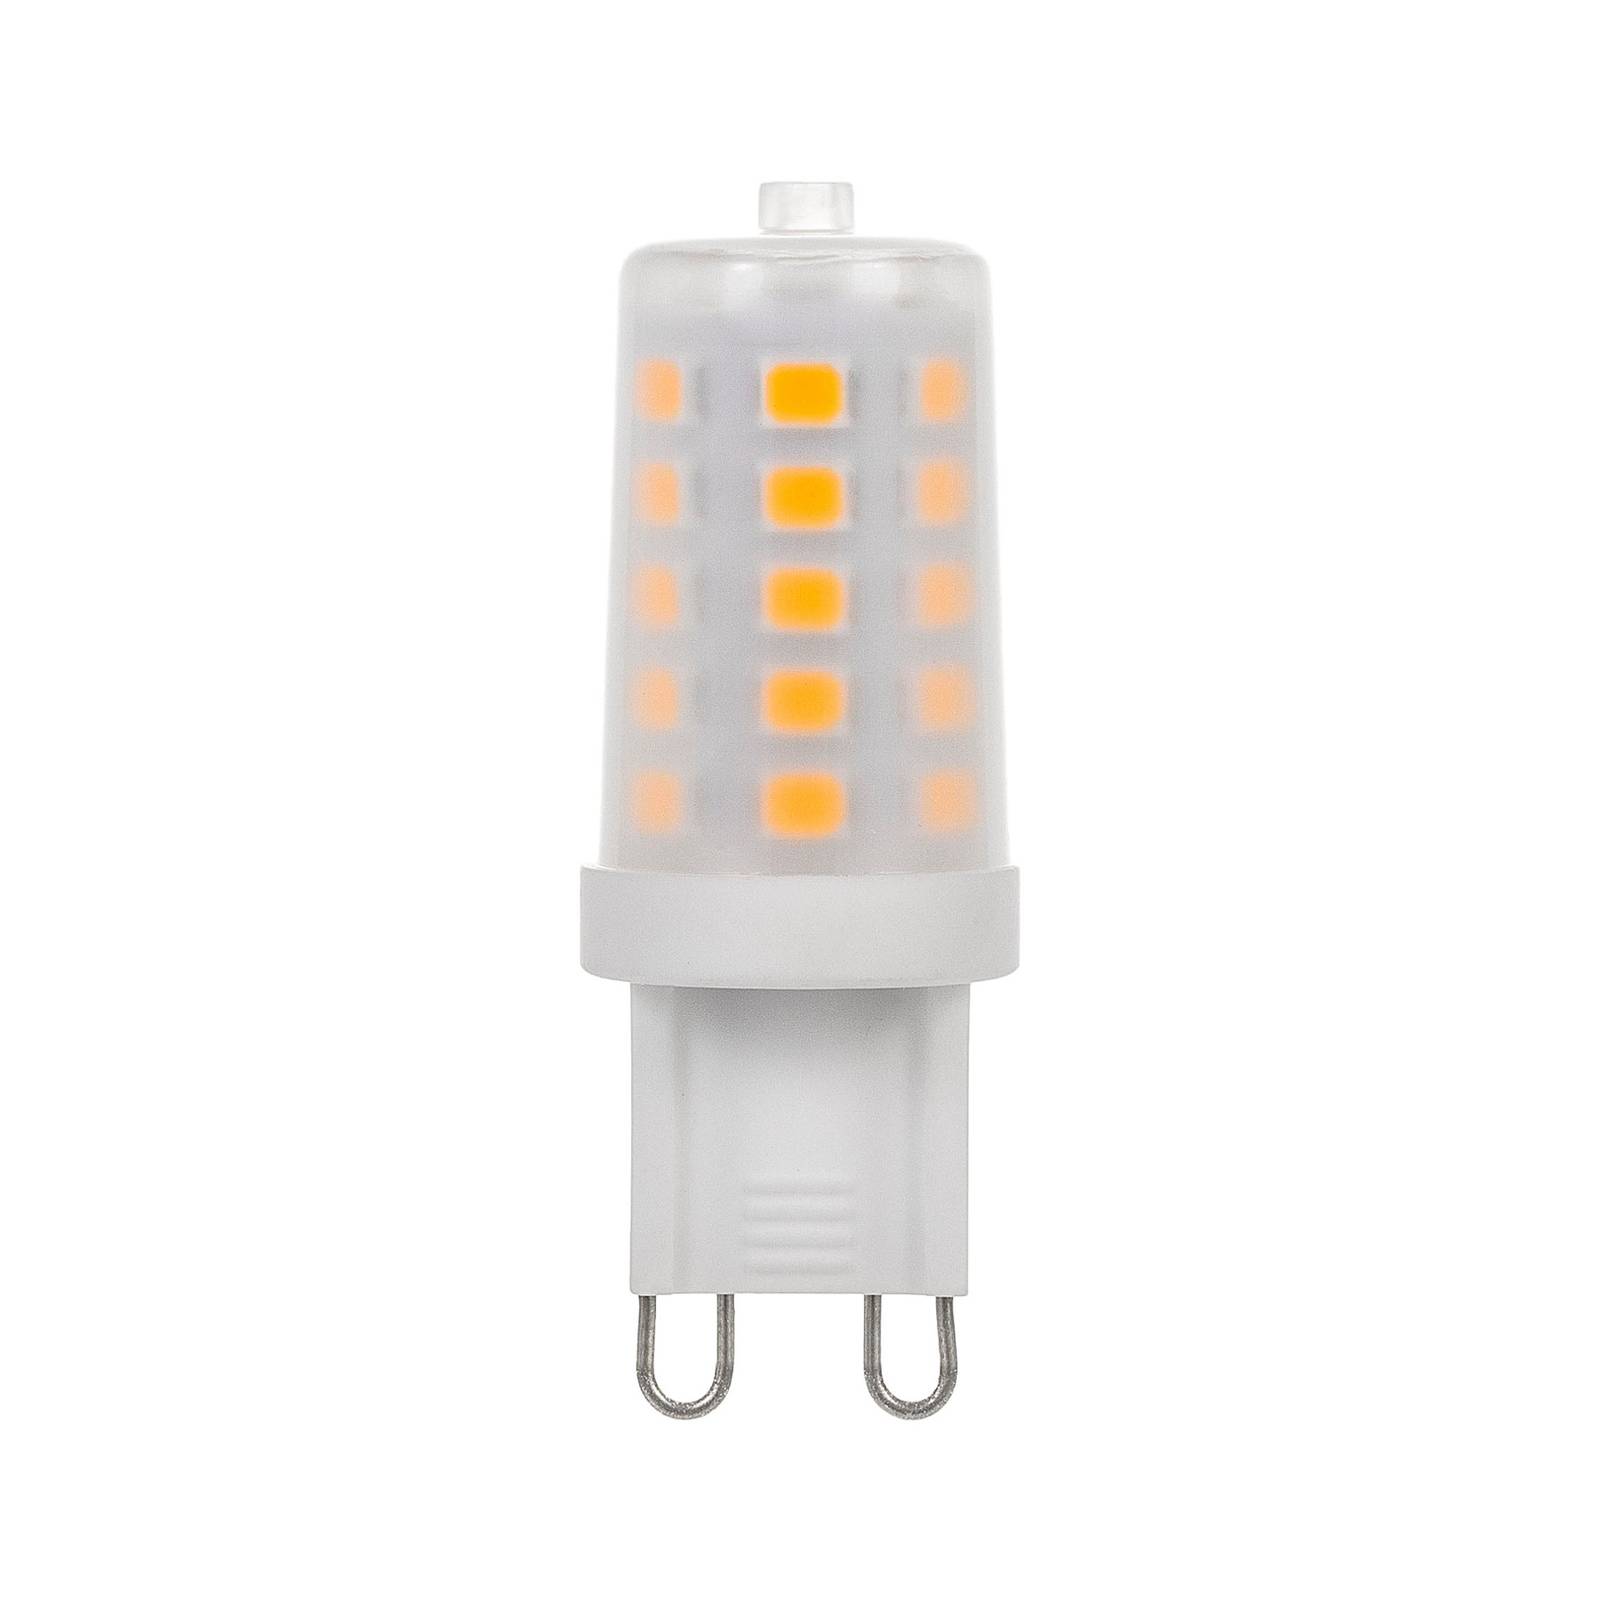 Lindby LED-lampa G9 3W 2 700K 280lm dimbar